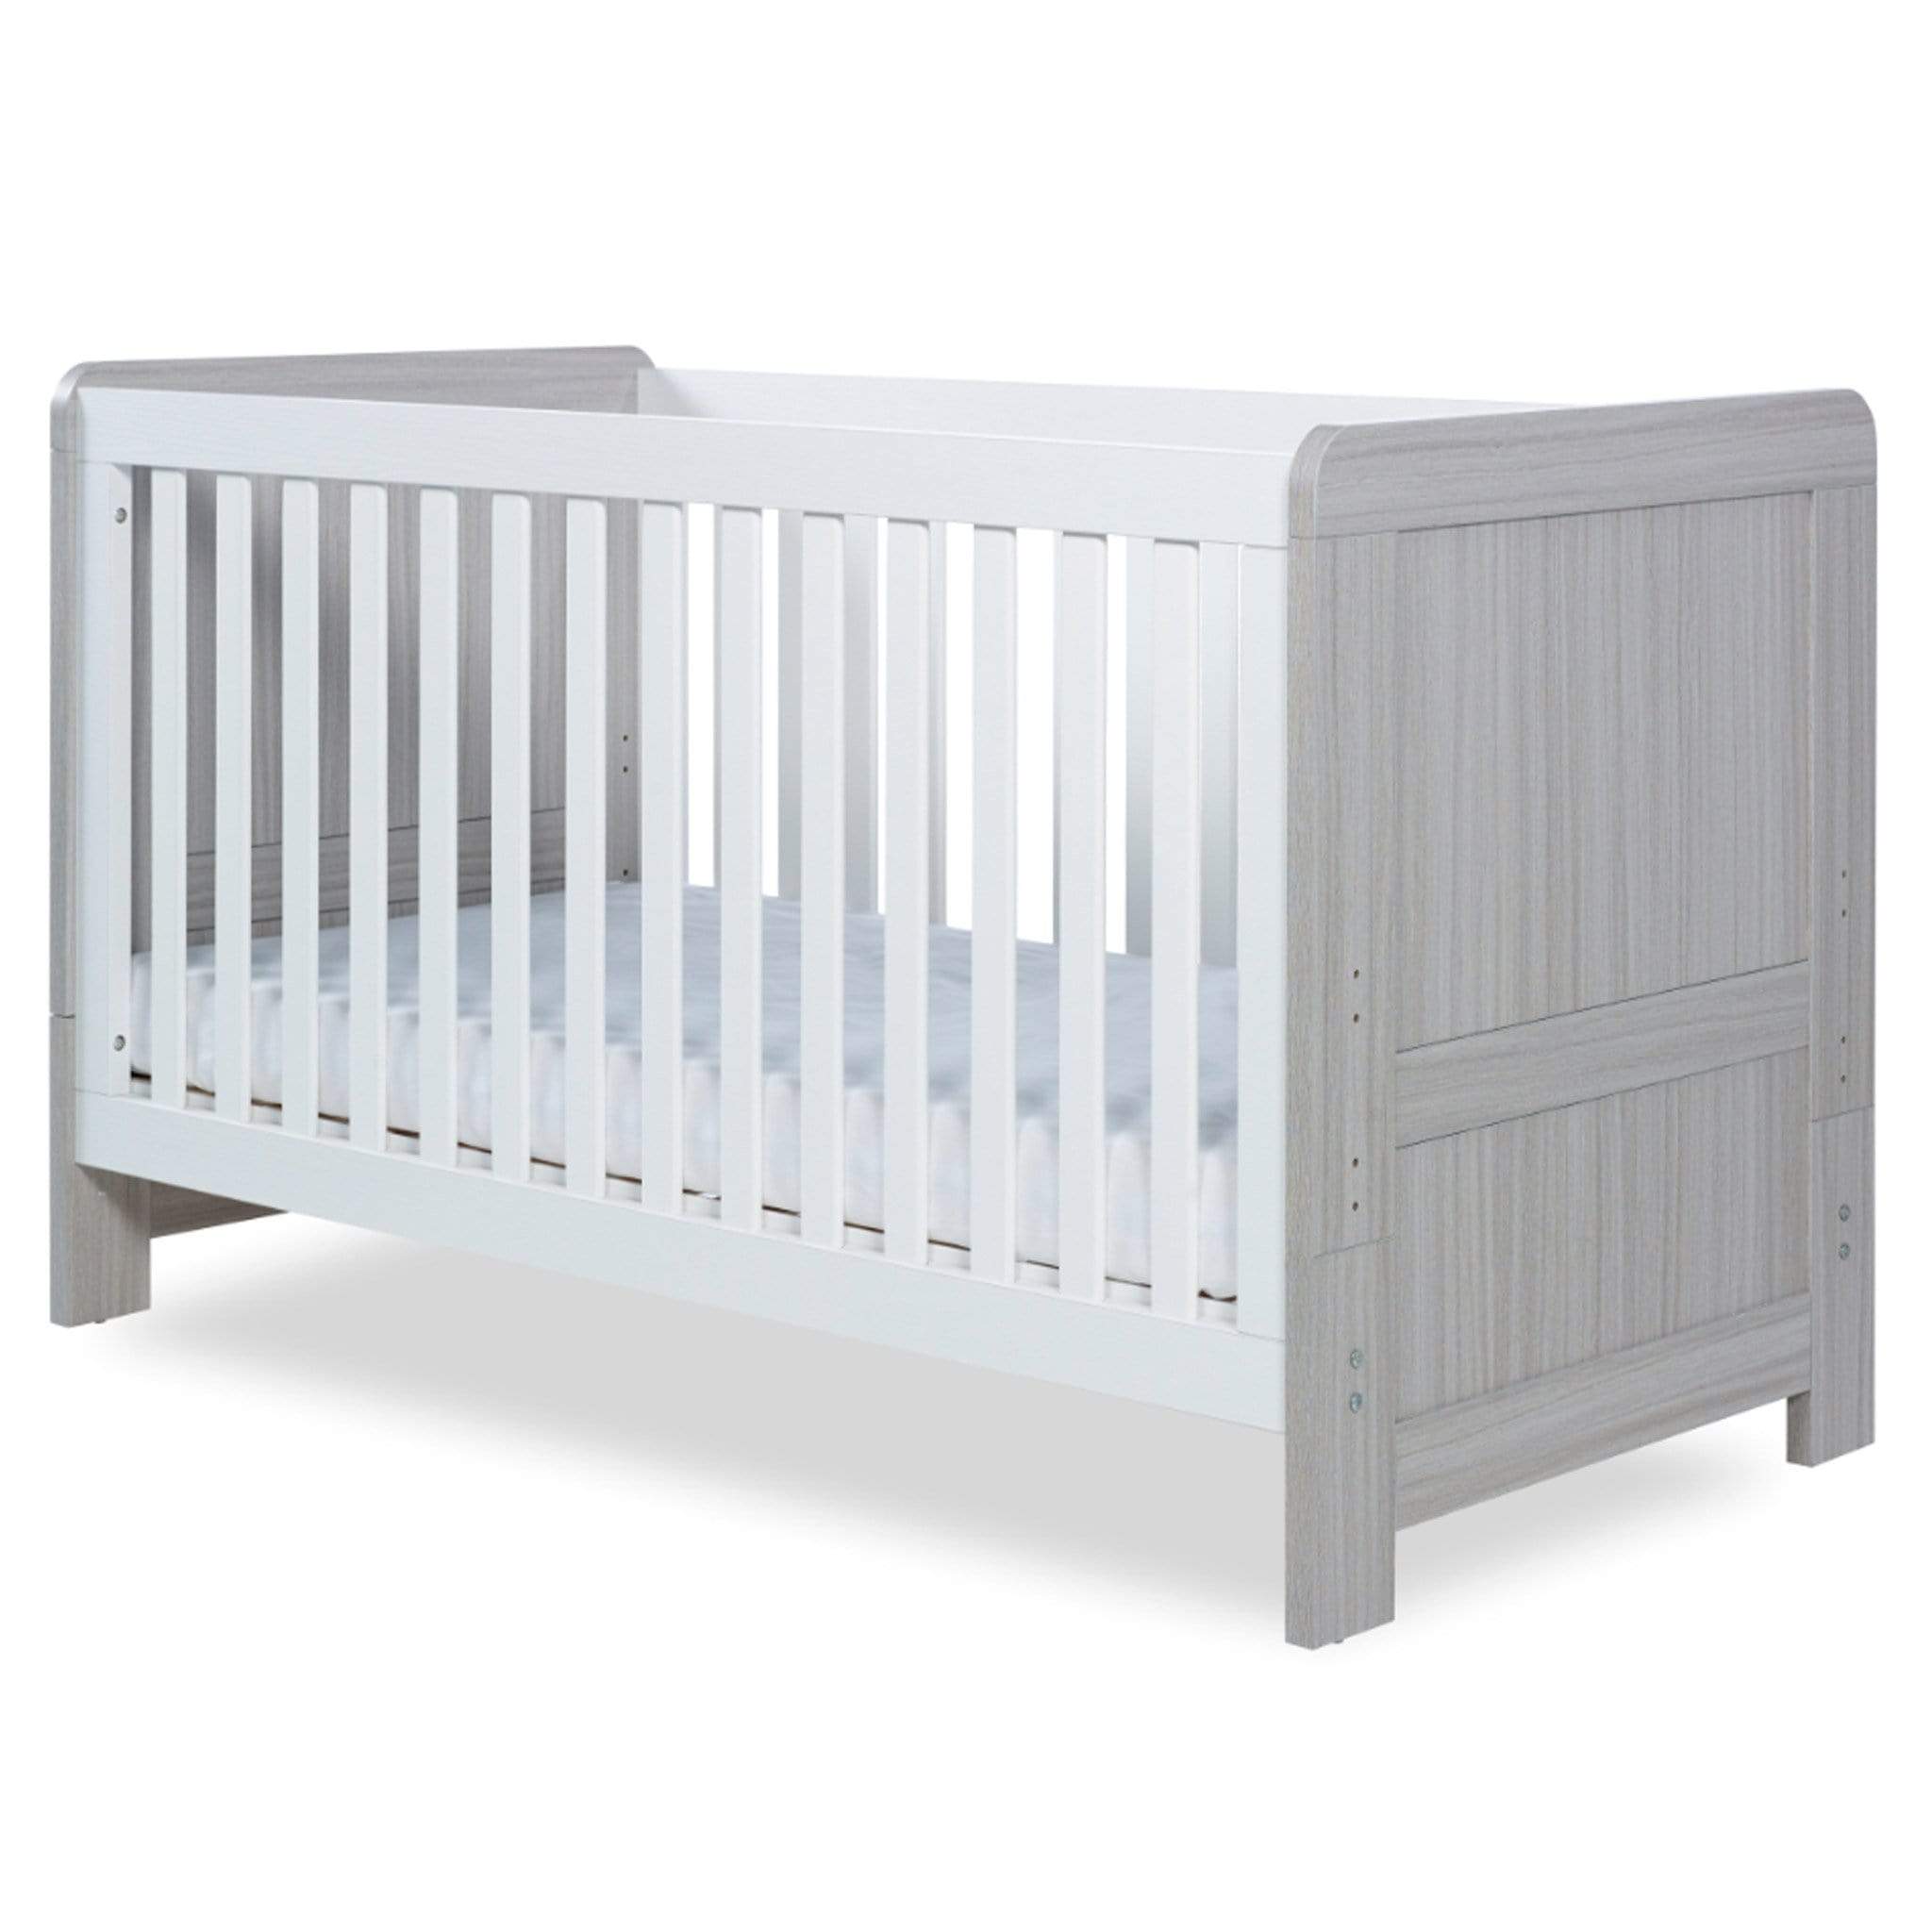 Ickle Bubba Pembrey Cot Bed Ash Grey & White Cot Beds